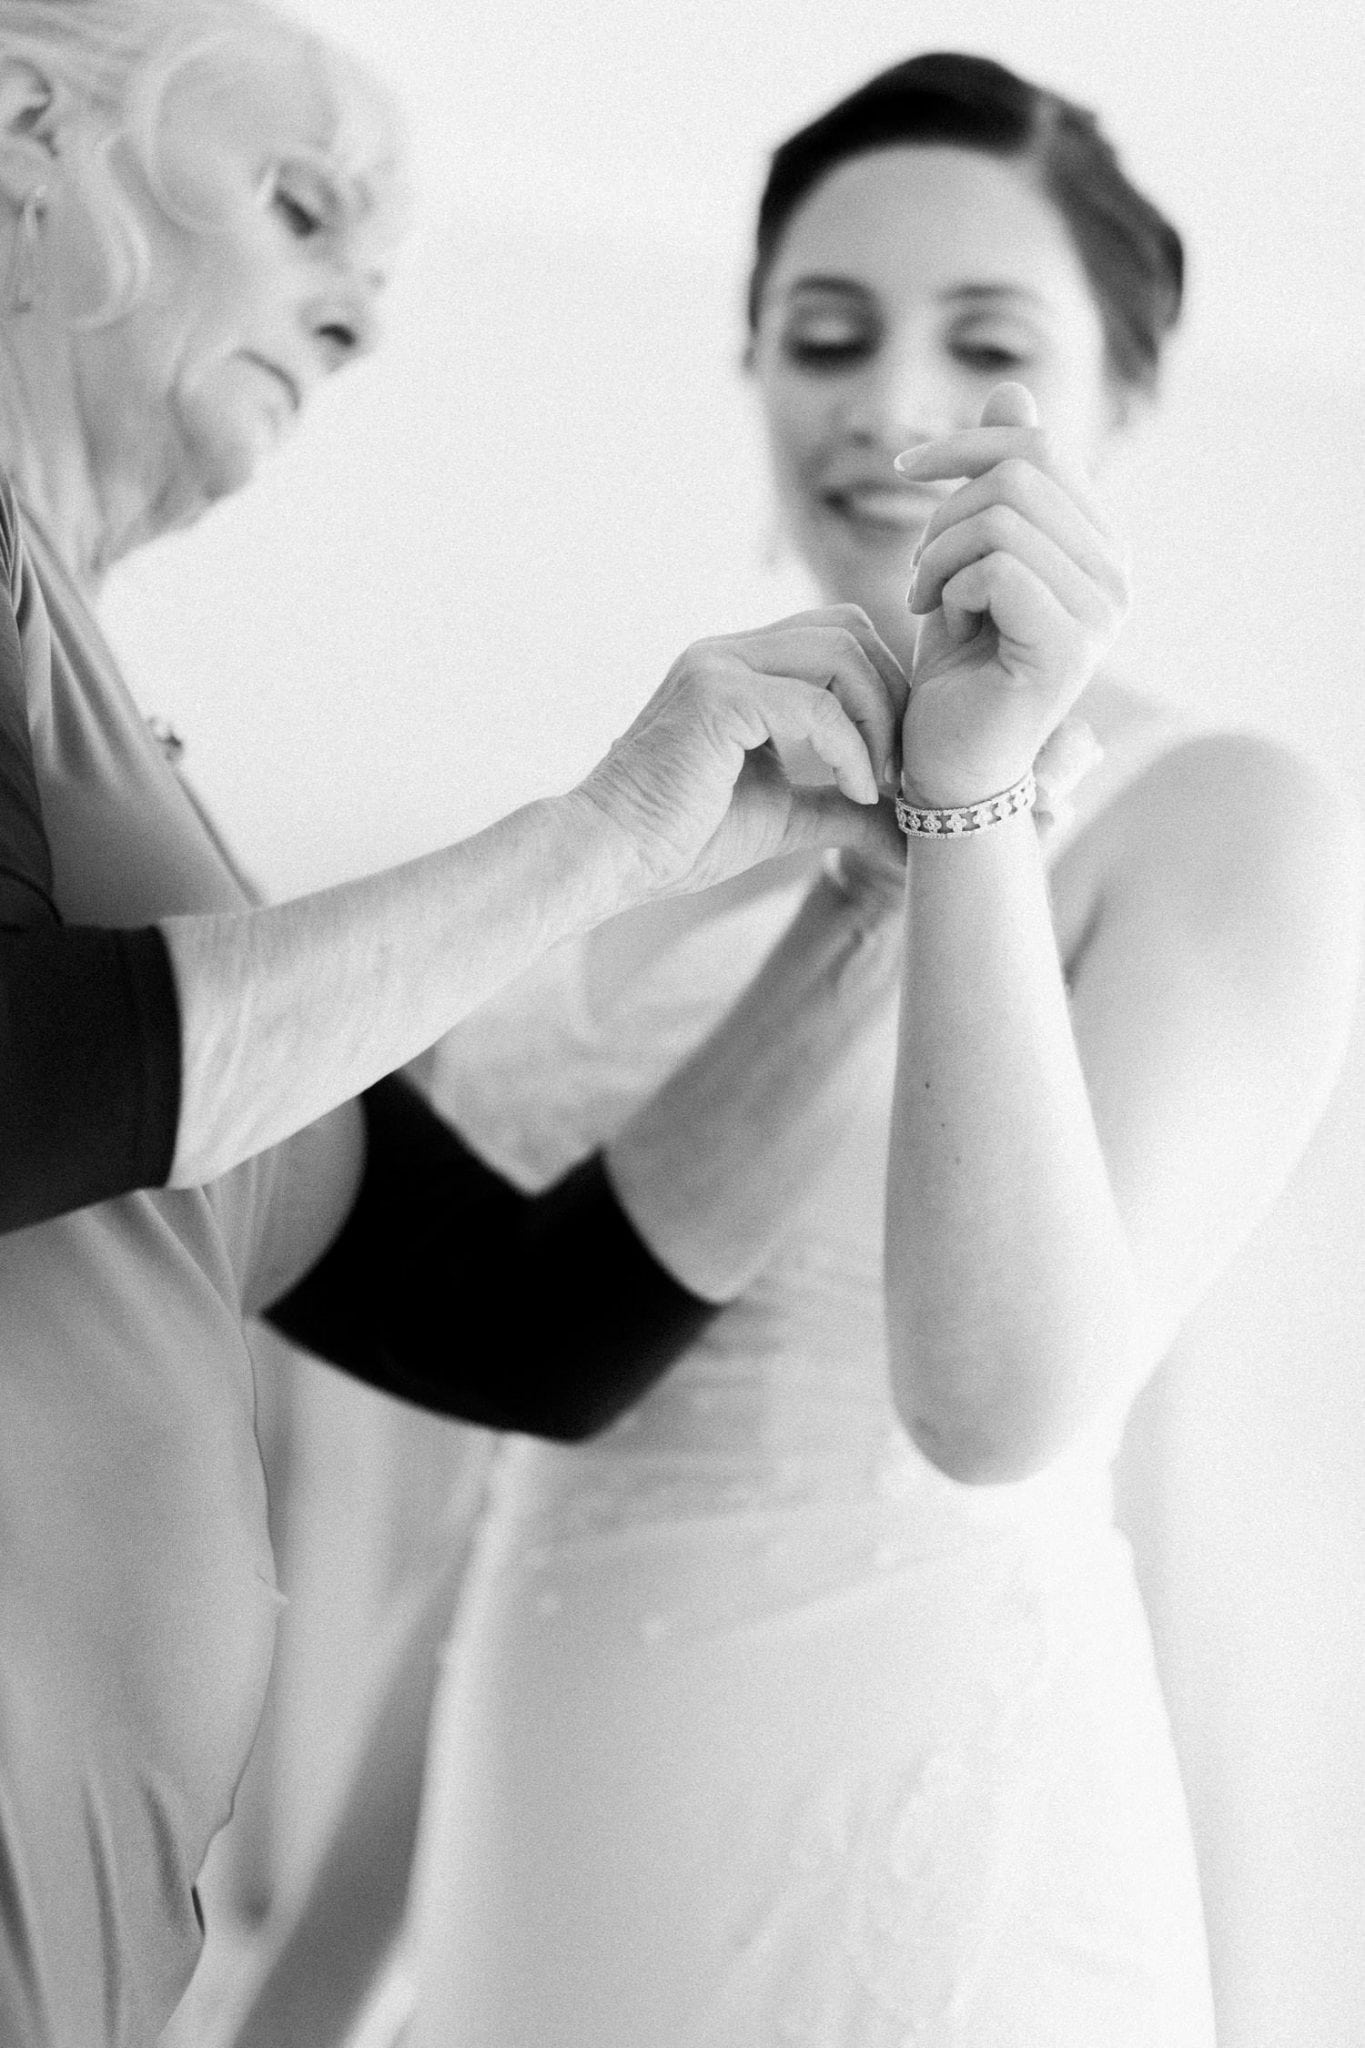 Mom putting a bracelet on the bride | Vancouver wedding photographer